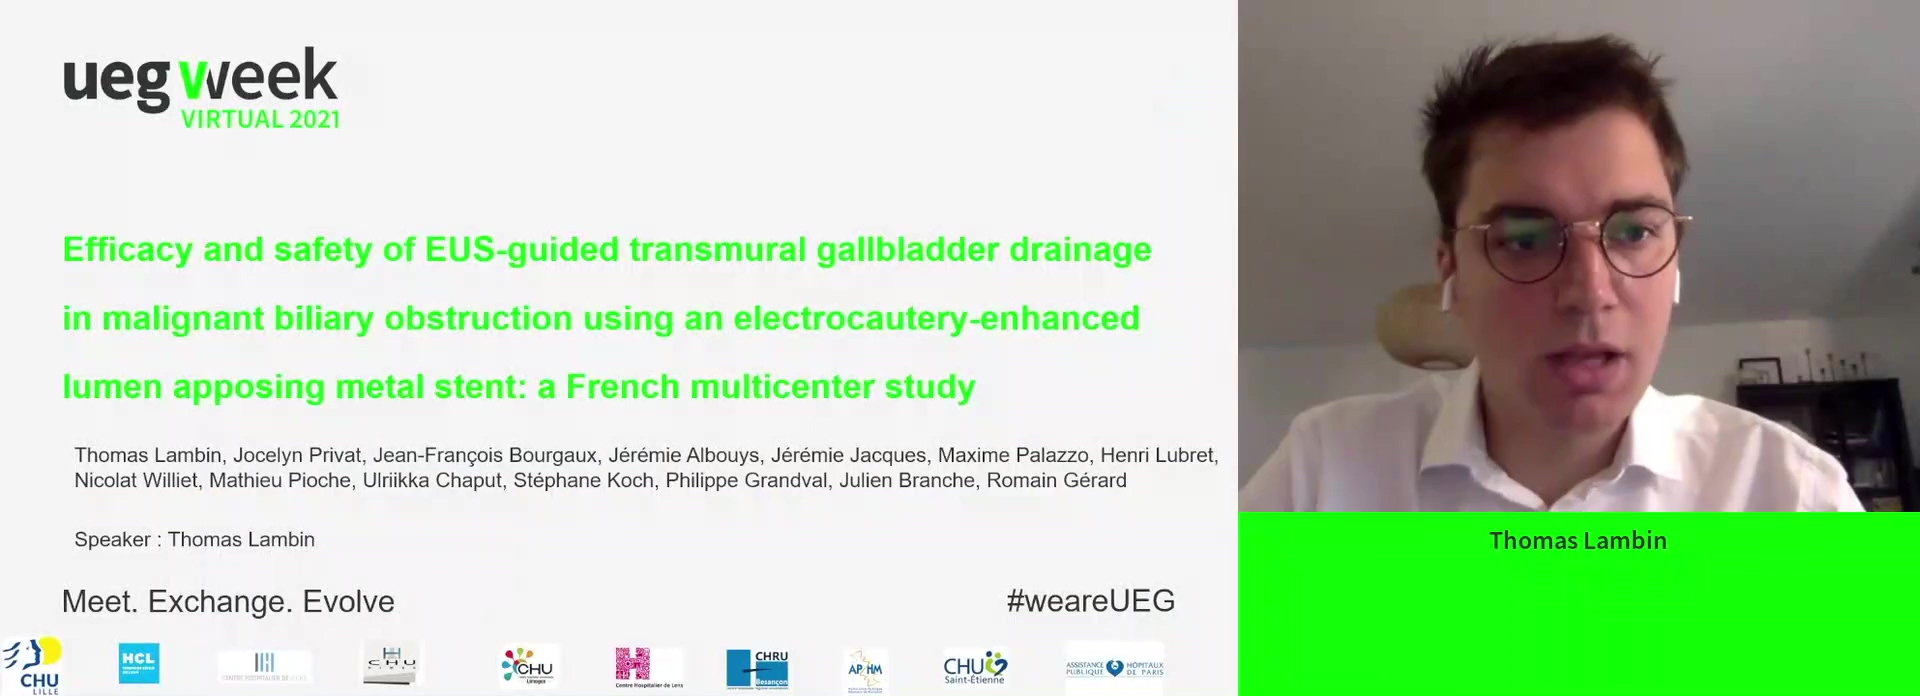 EFFICACY AND SAFETY OF EUS GUIDED TRANSMURAL GALLBLADDER DRAINAGE IN MALIGNANT BILIARY OBSTRUCTION USING AN ELECTROCAUTERY-ENHANCED LUMEN APPOSING METAL STENT: A MULTICENTER STUDY